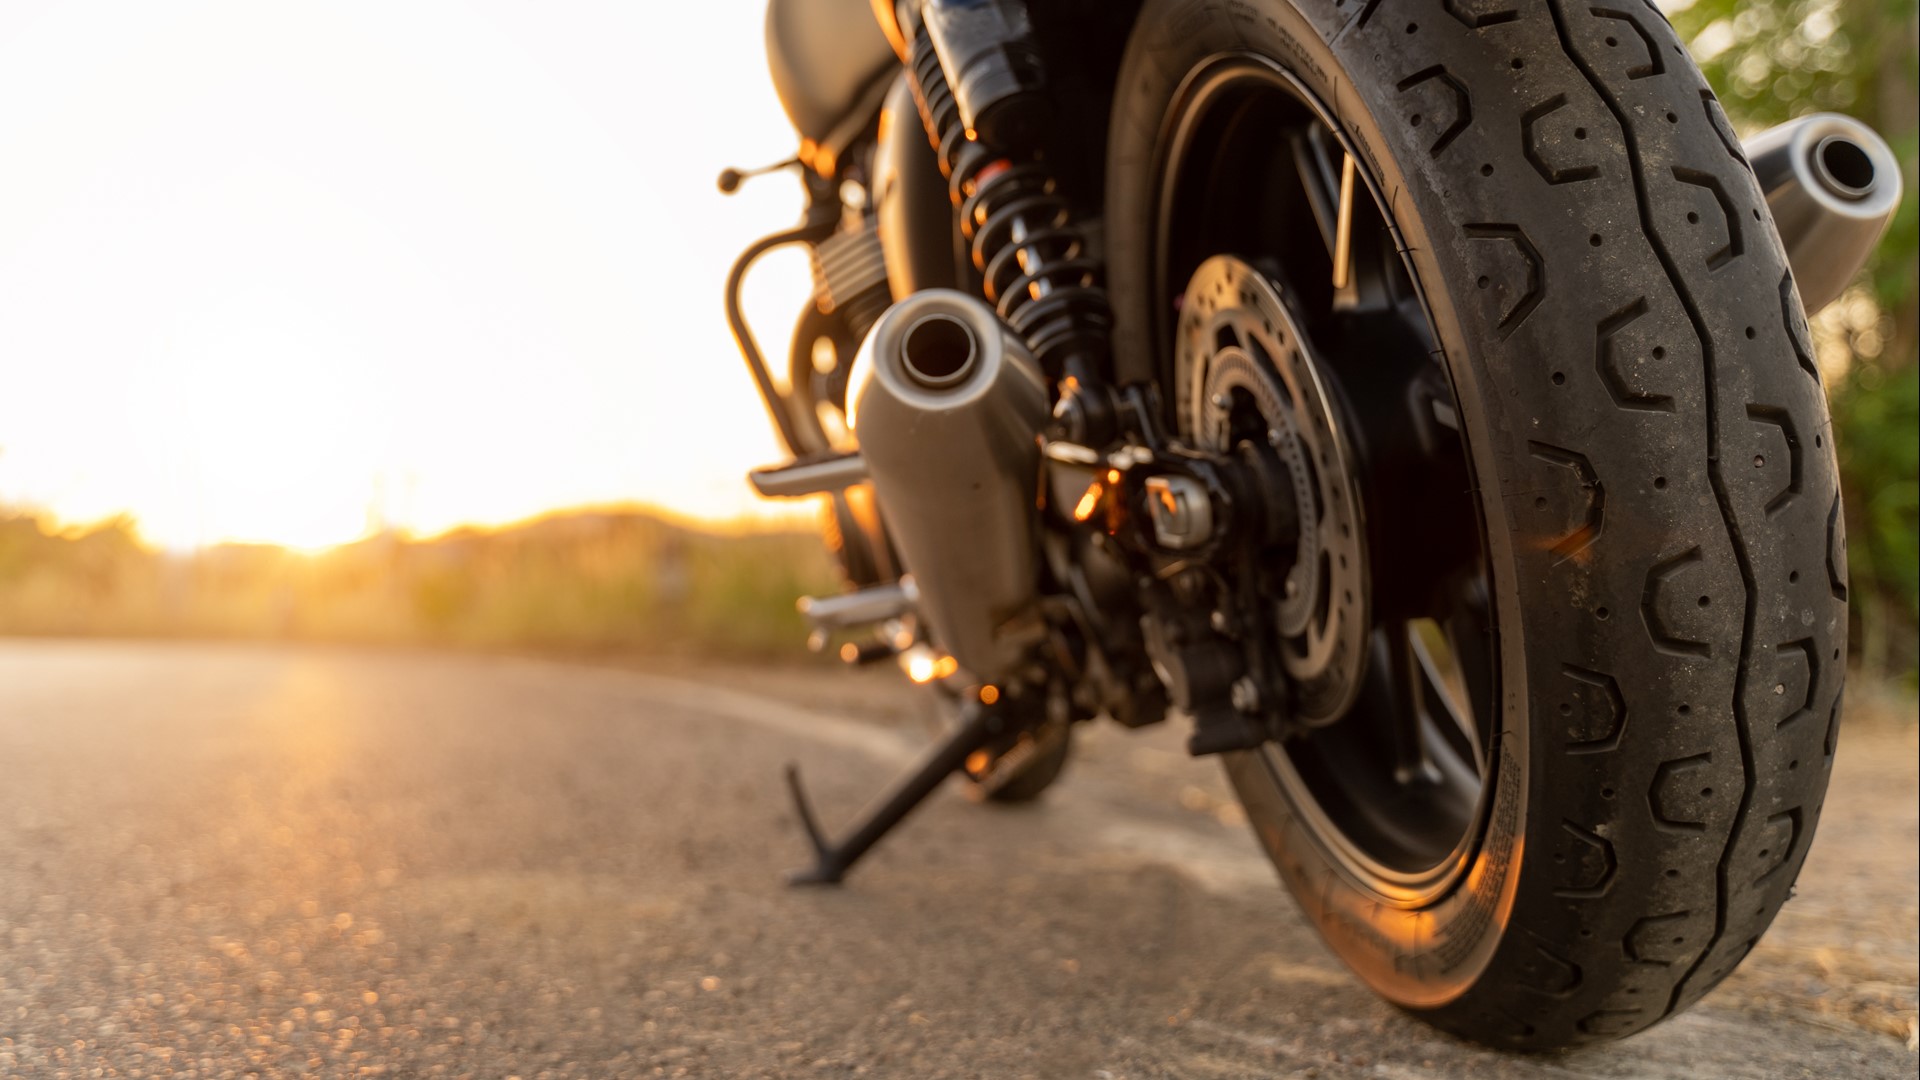 More than 6,200 motorcyclists were killed in 2022, according to the National Highway Traffic Safety Administration. The main cause was not wearing a helmet.